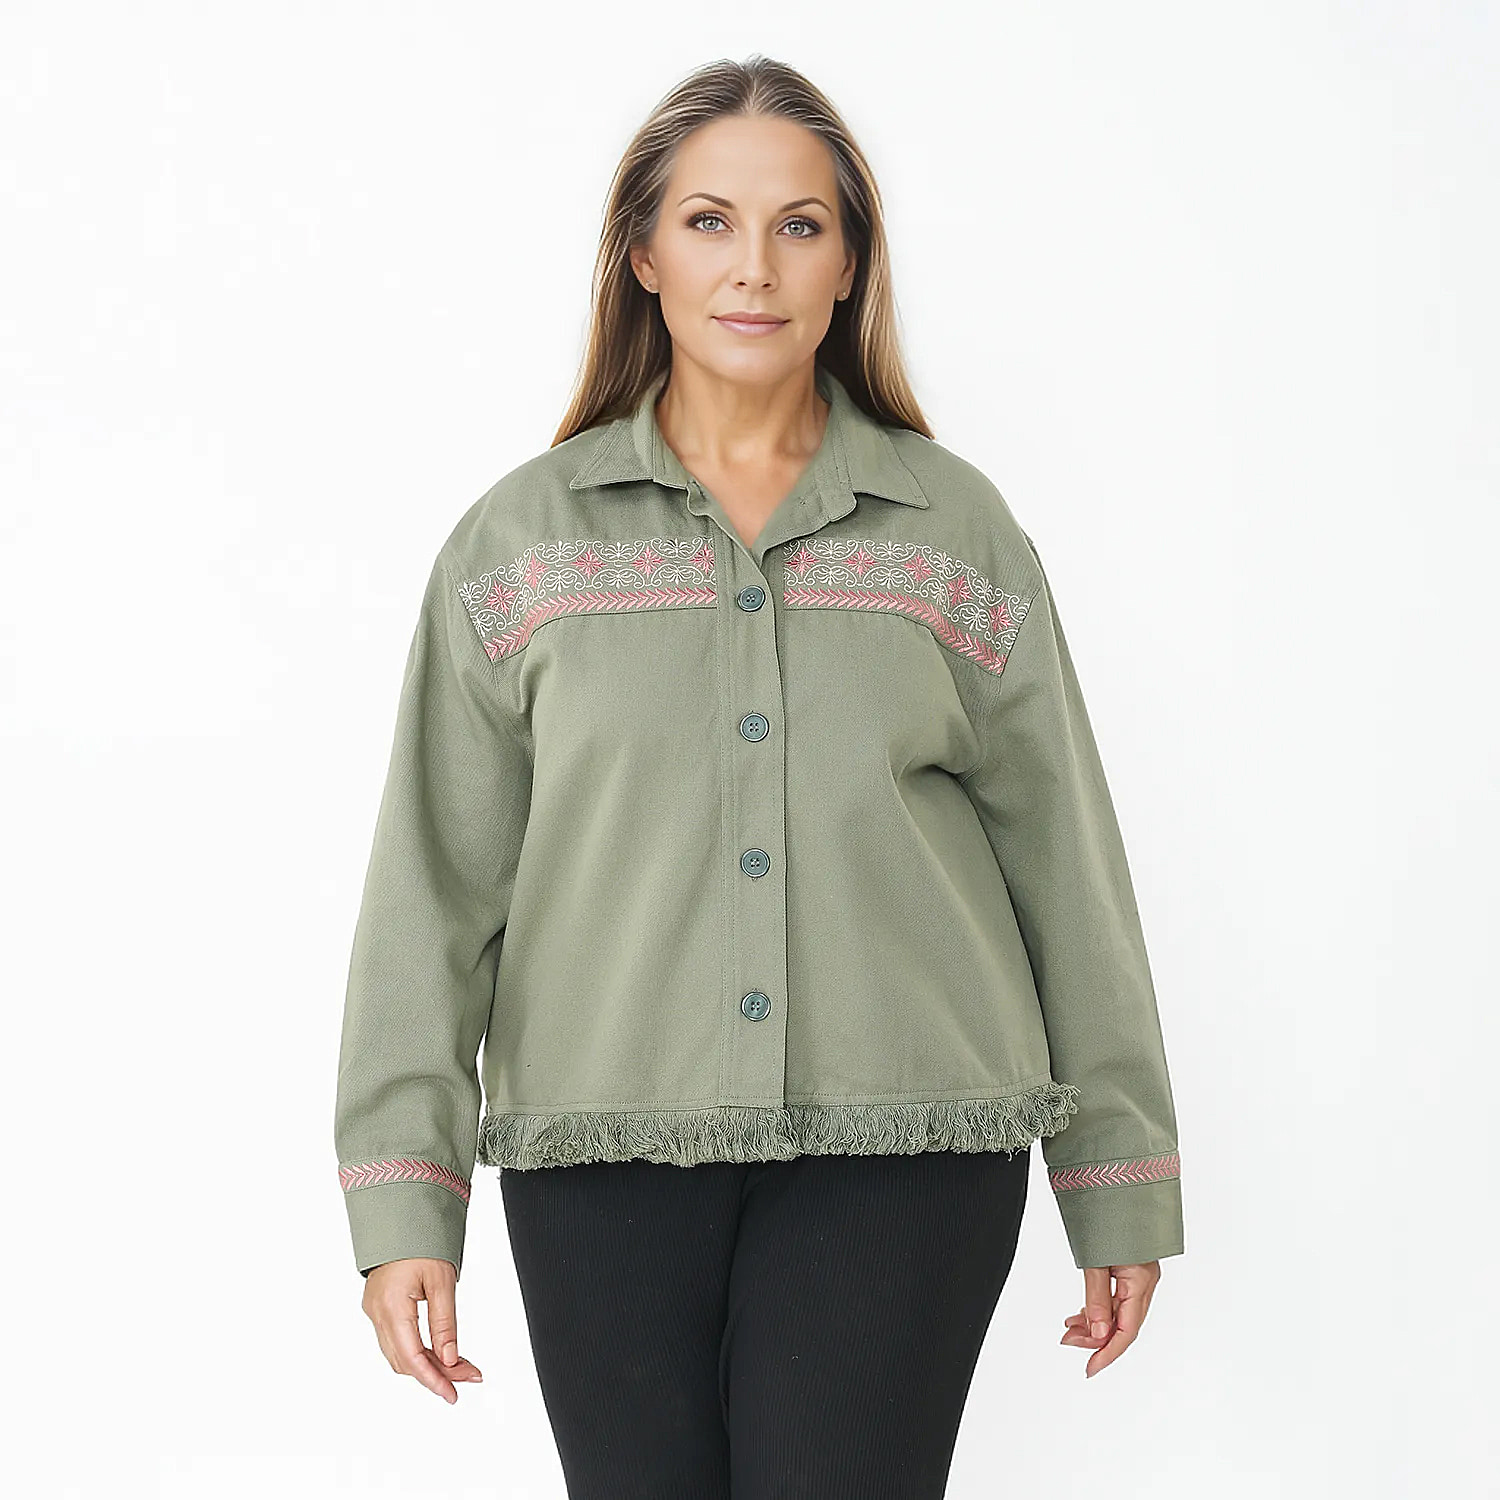 Tamsy 100% Cotton Embroidered Jacket (Size L,16-18) - Moss Green